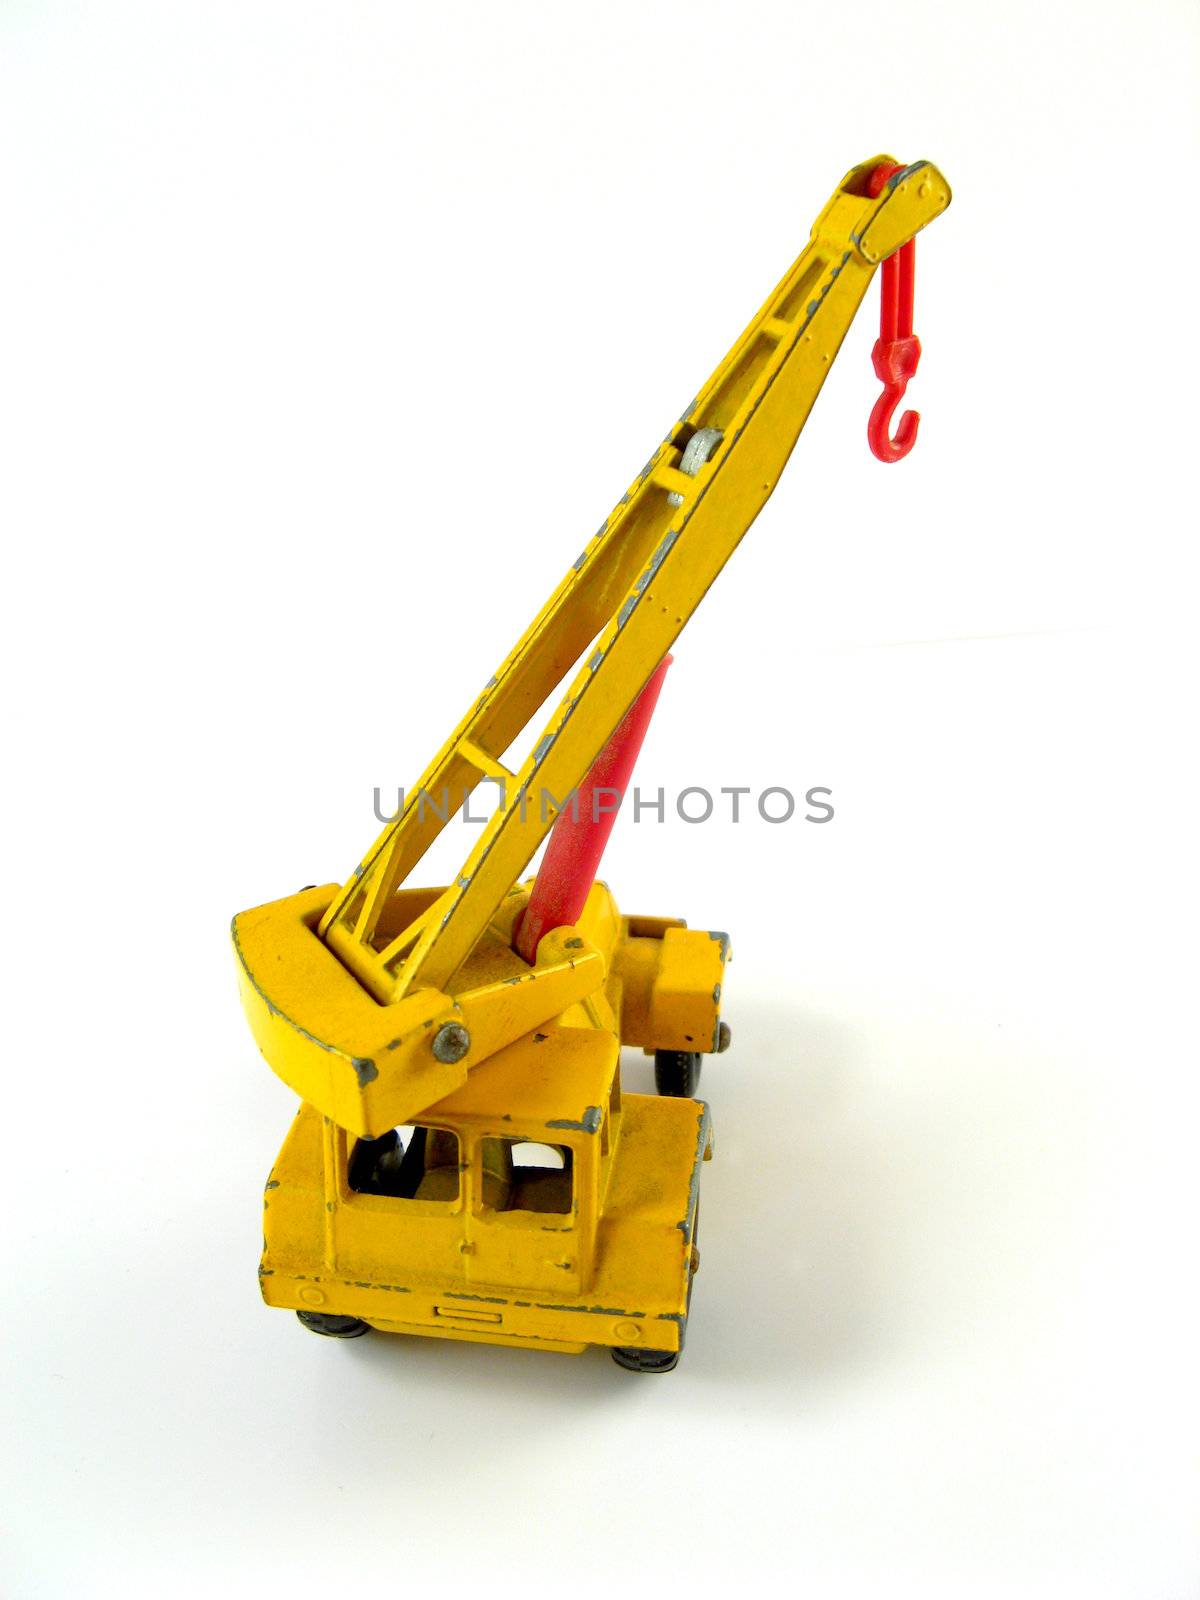 Mobile crane truck on a white background